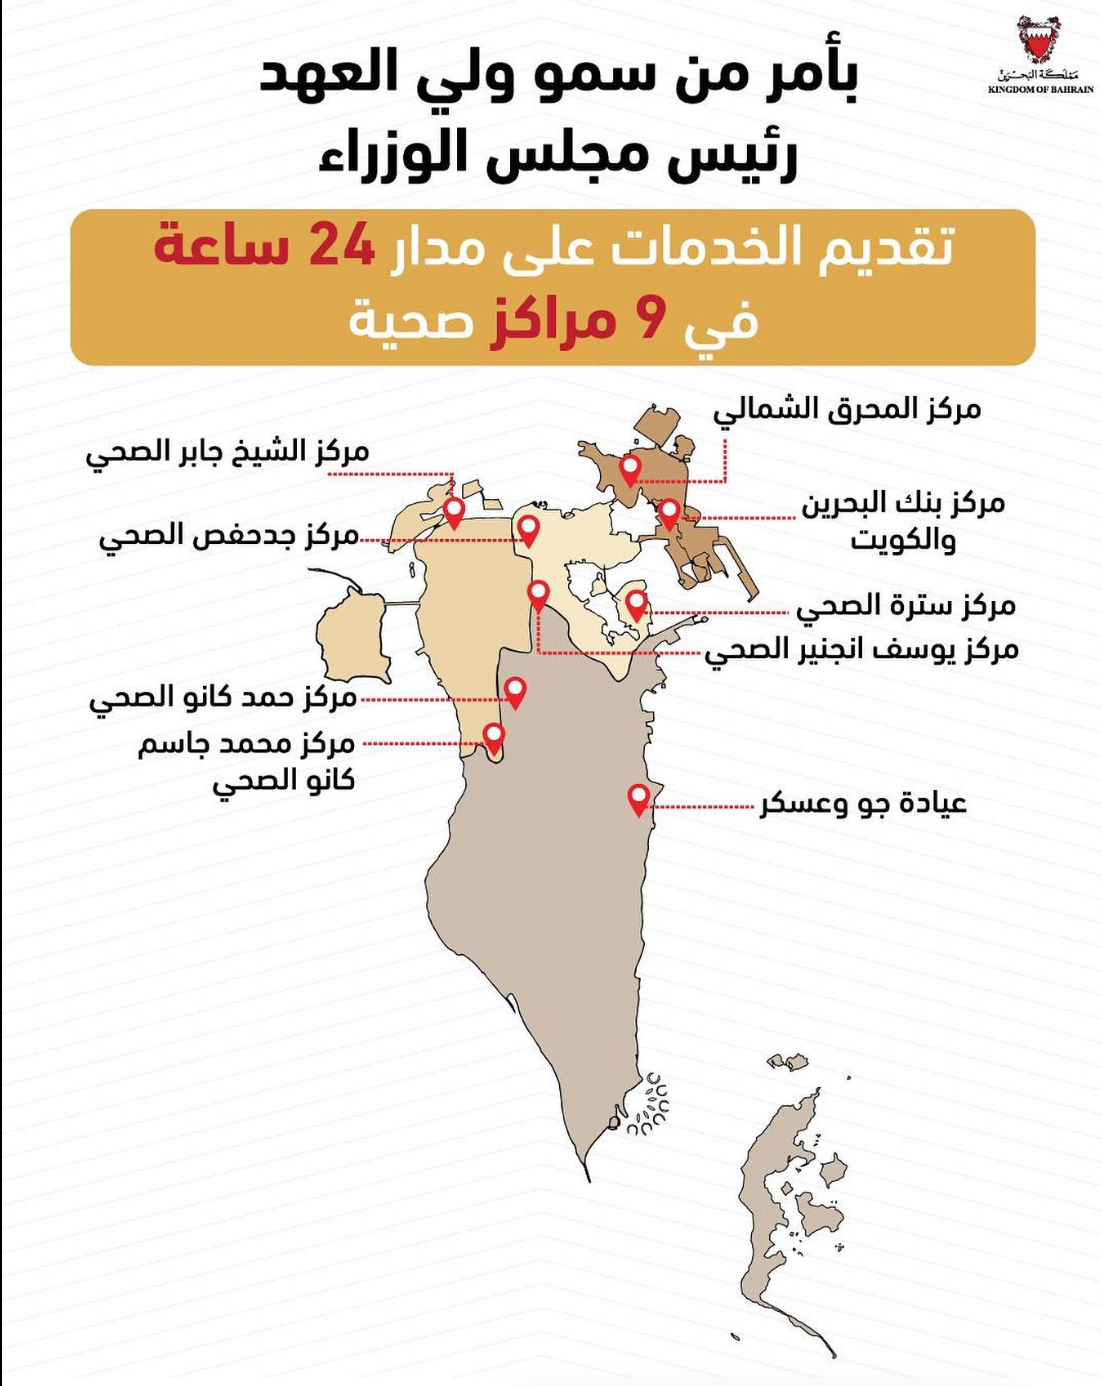 HRH the Crown Prince and Prime Minister directs for nine health centers to operate 24 hours a day across Bahrain